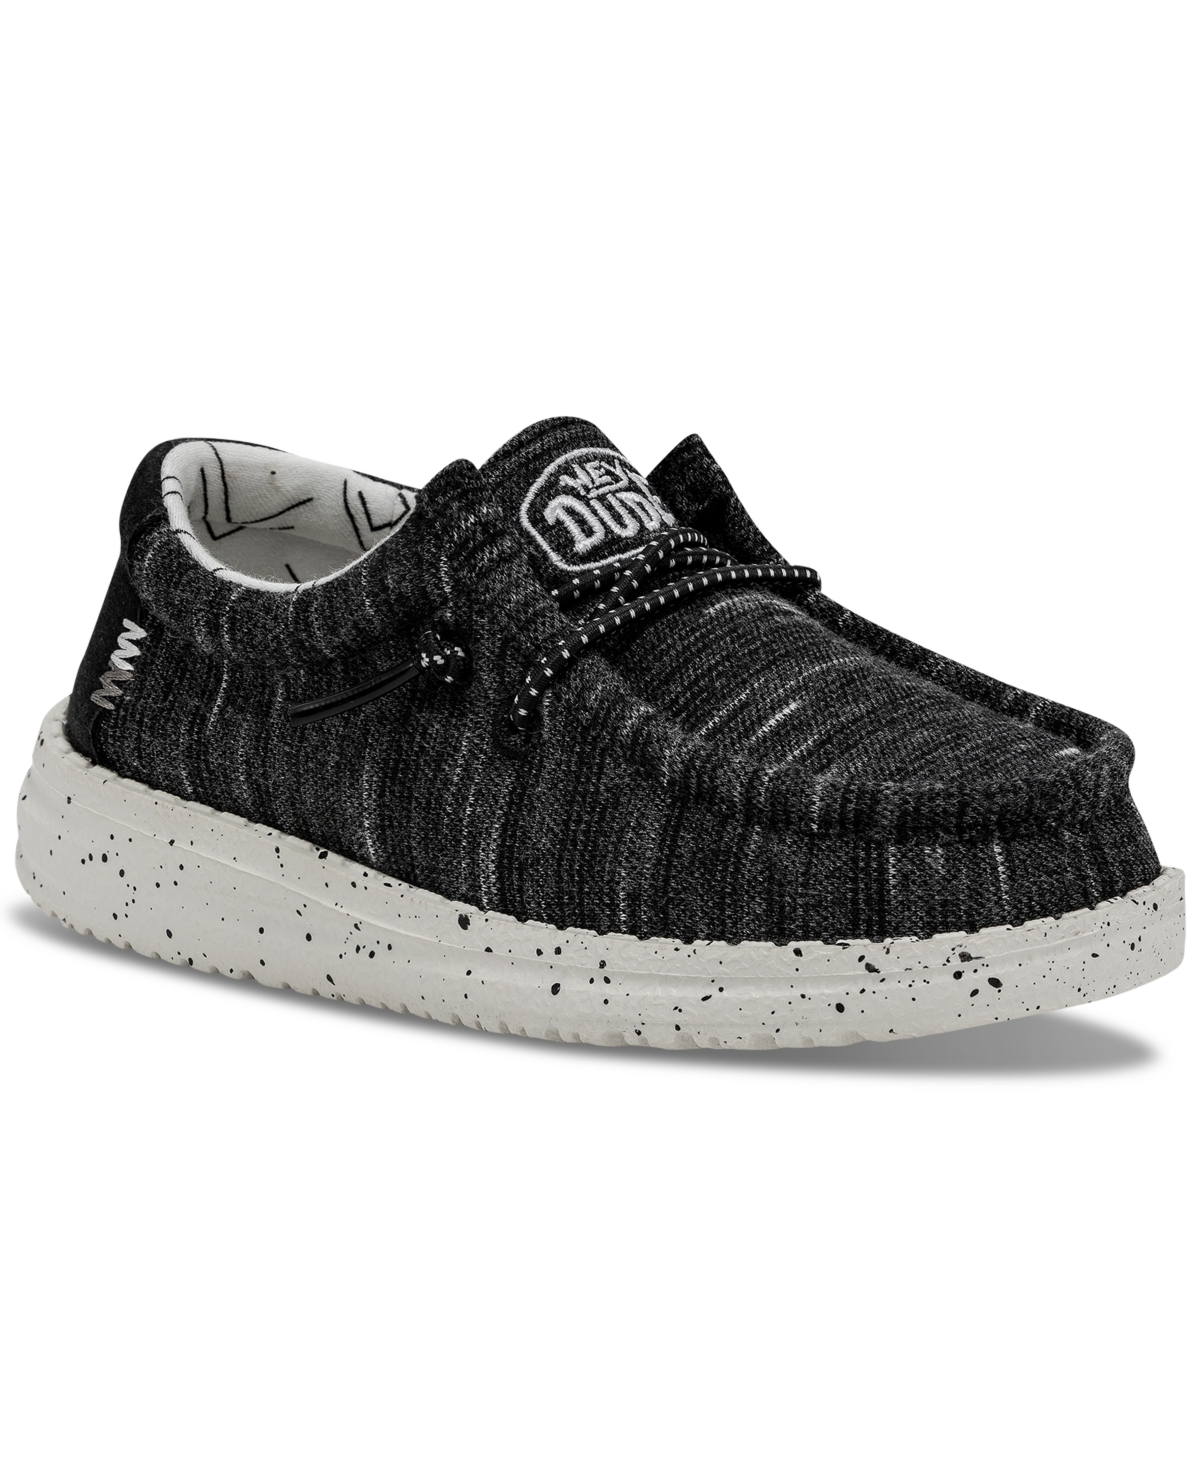 Hey Dude Men's Wally Black Shell Casual Slip-On Moccasin Sneakers